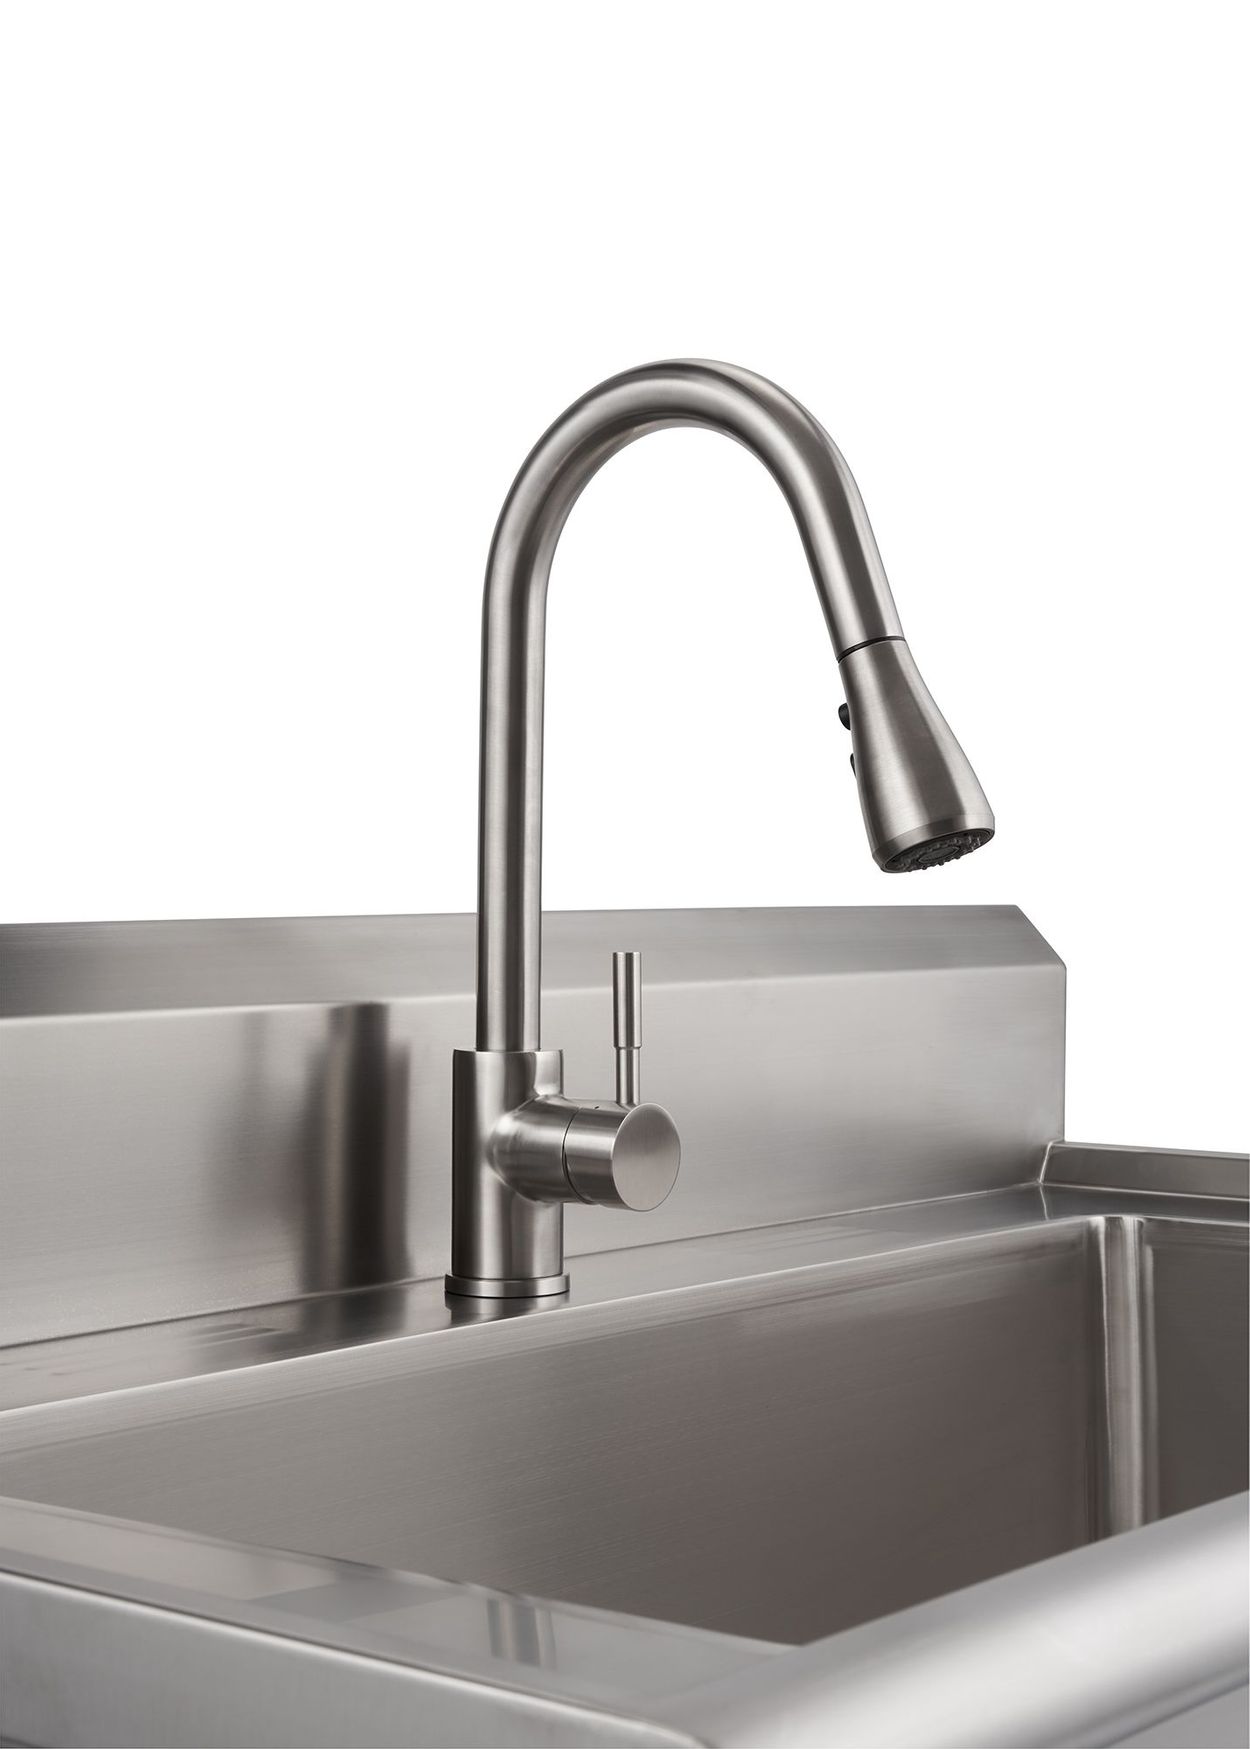 Swiveling, single handle faucet with hot and cold water indicator